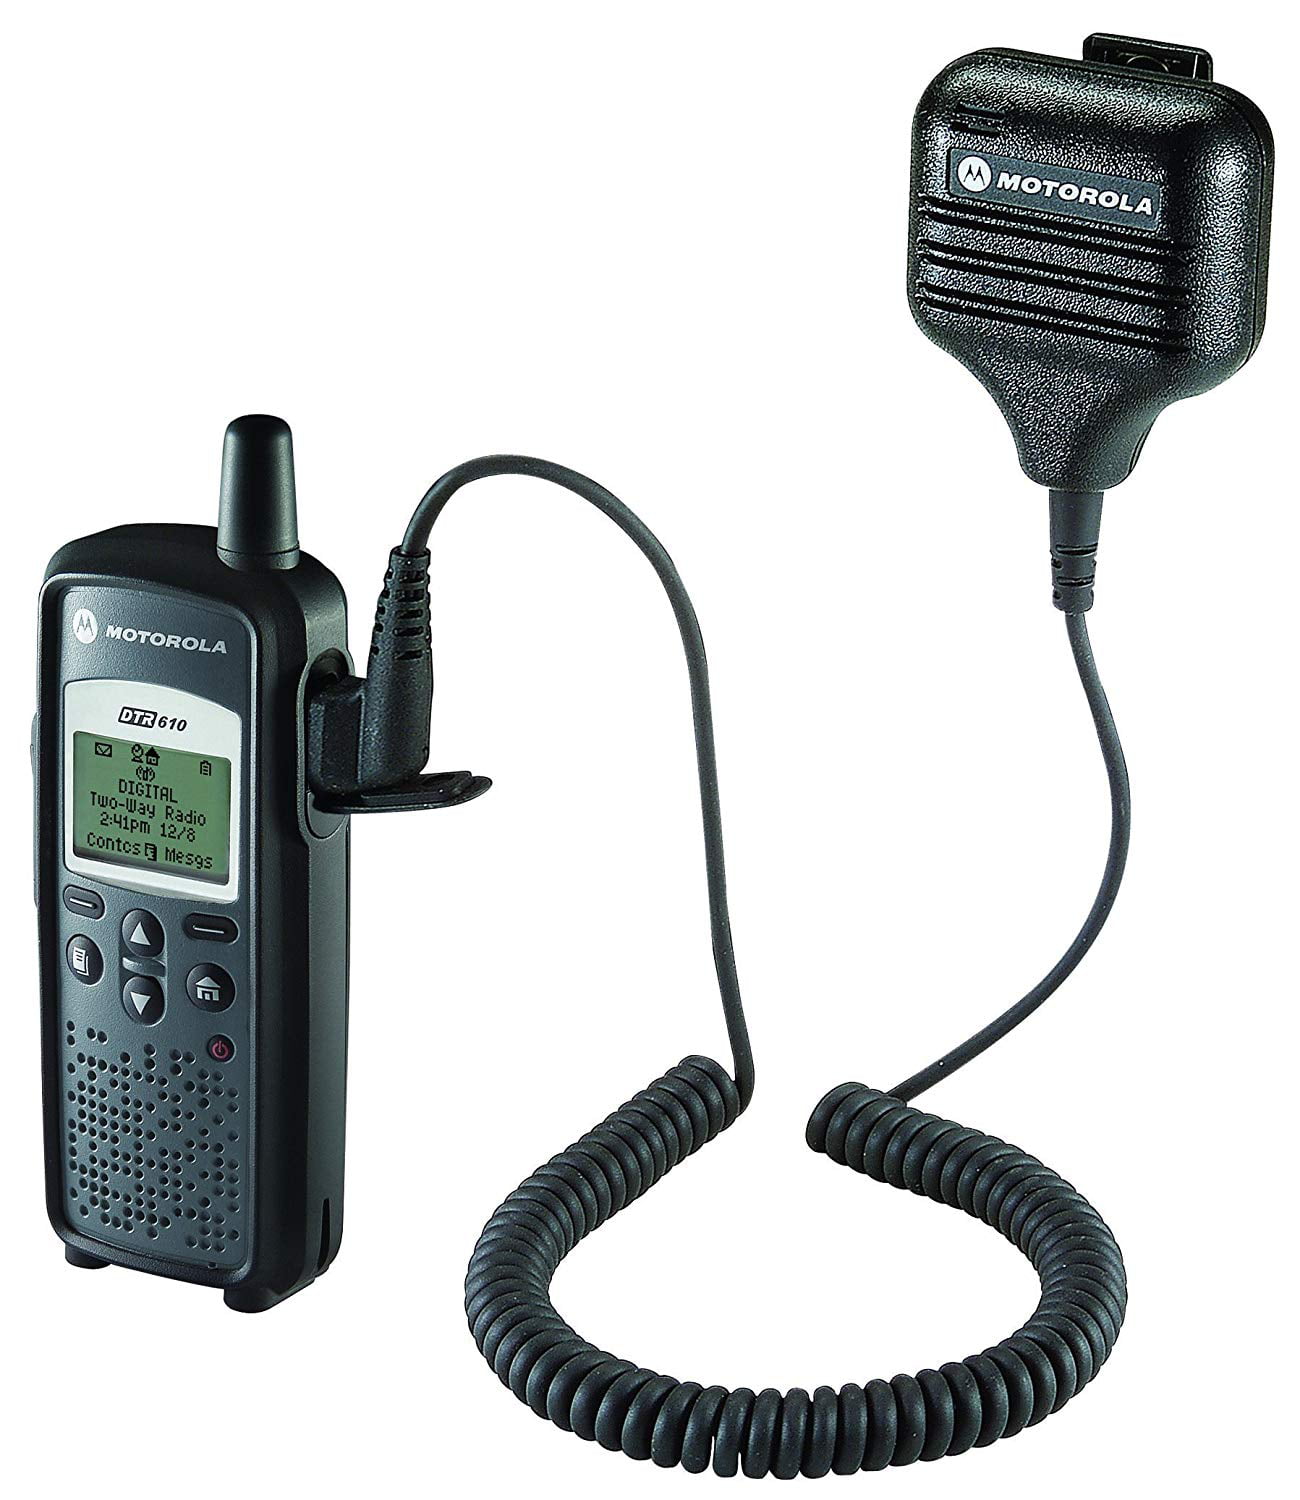 Motorola 53862 External Speakers and Mic with Push-to-Talk Button 